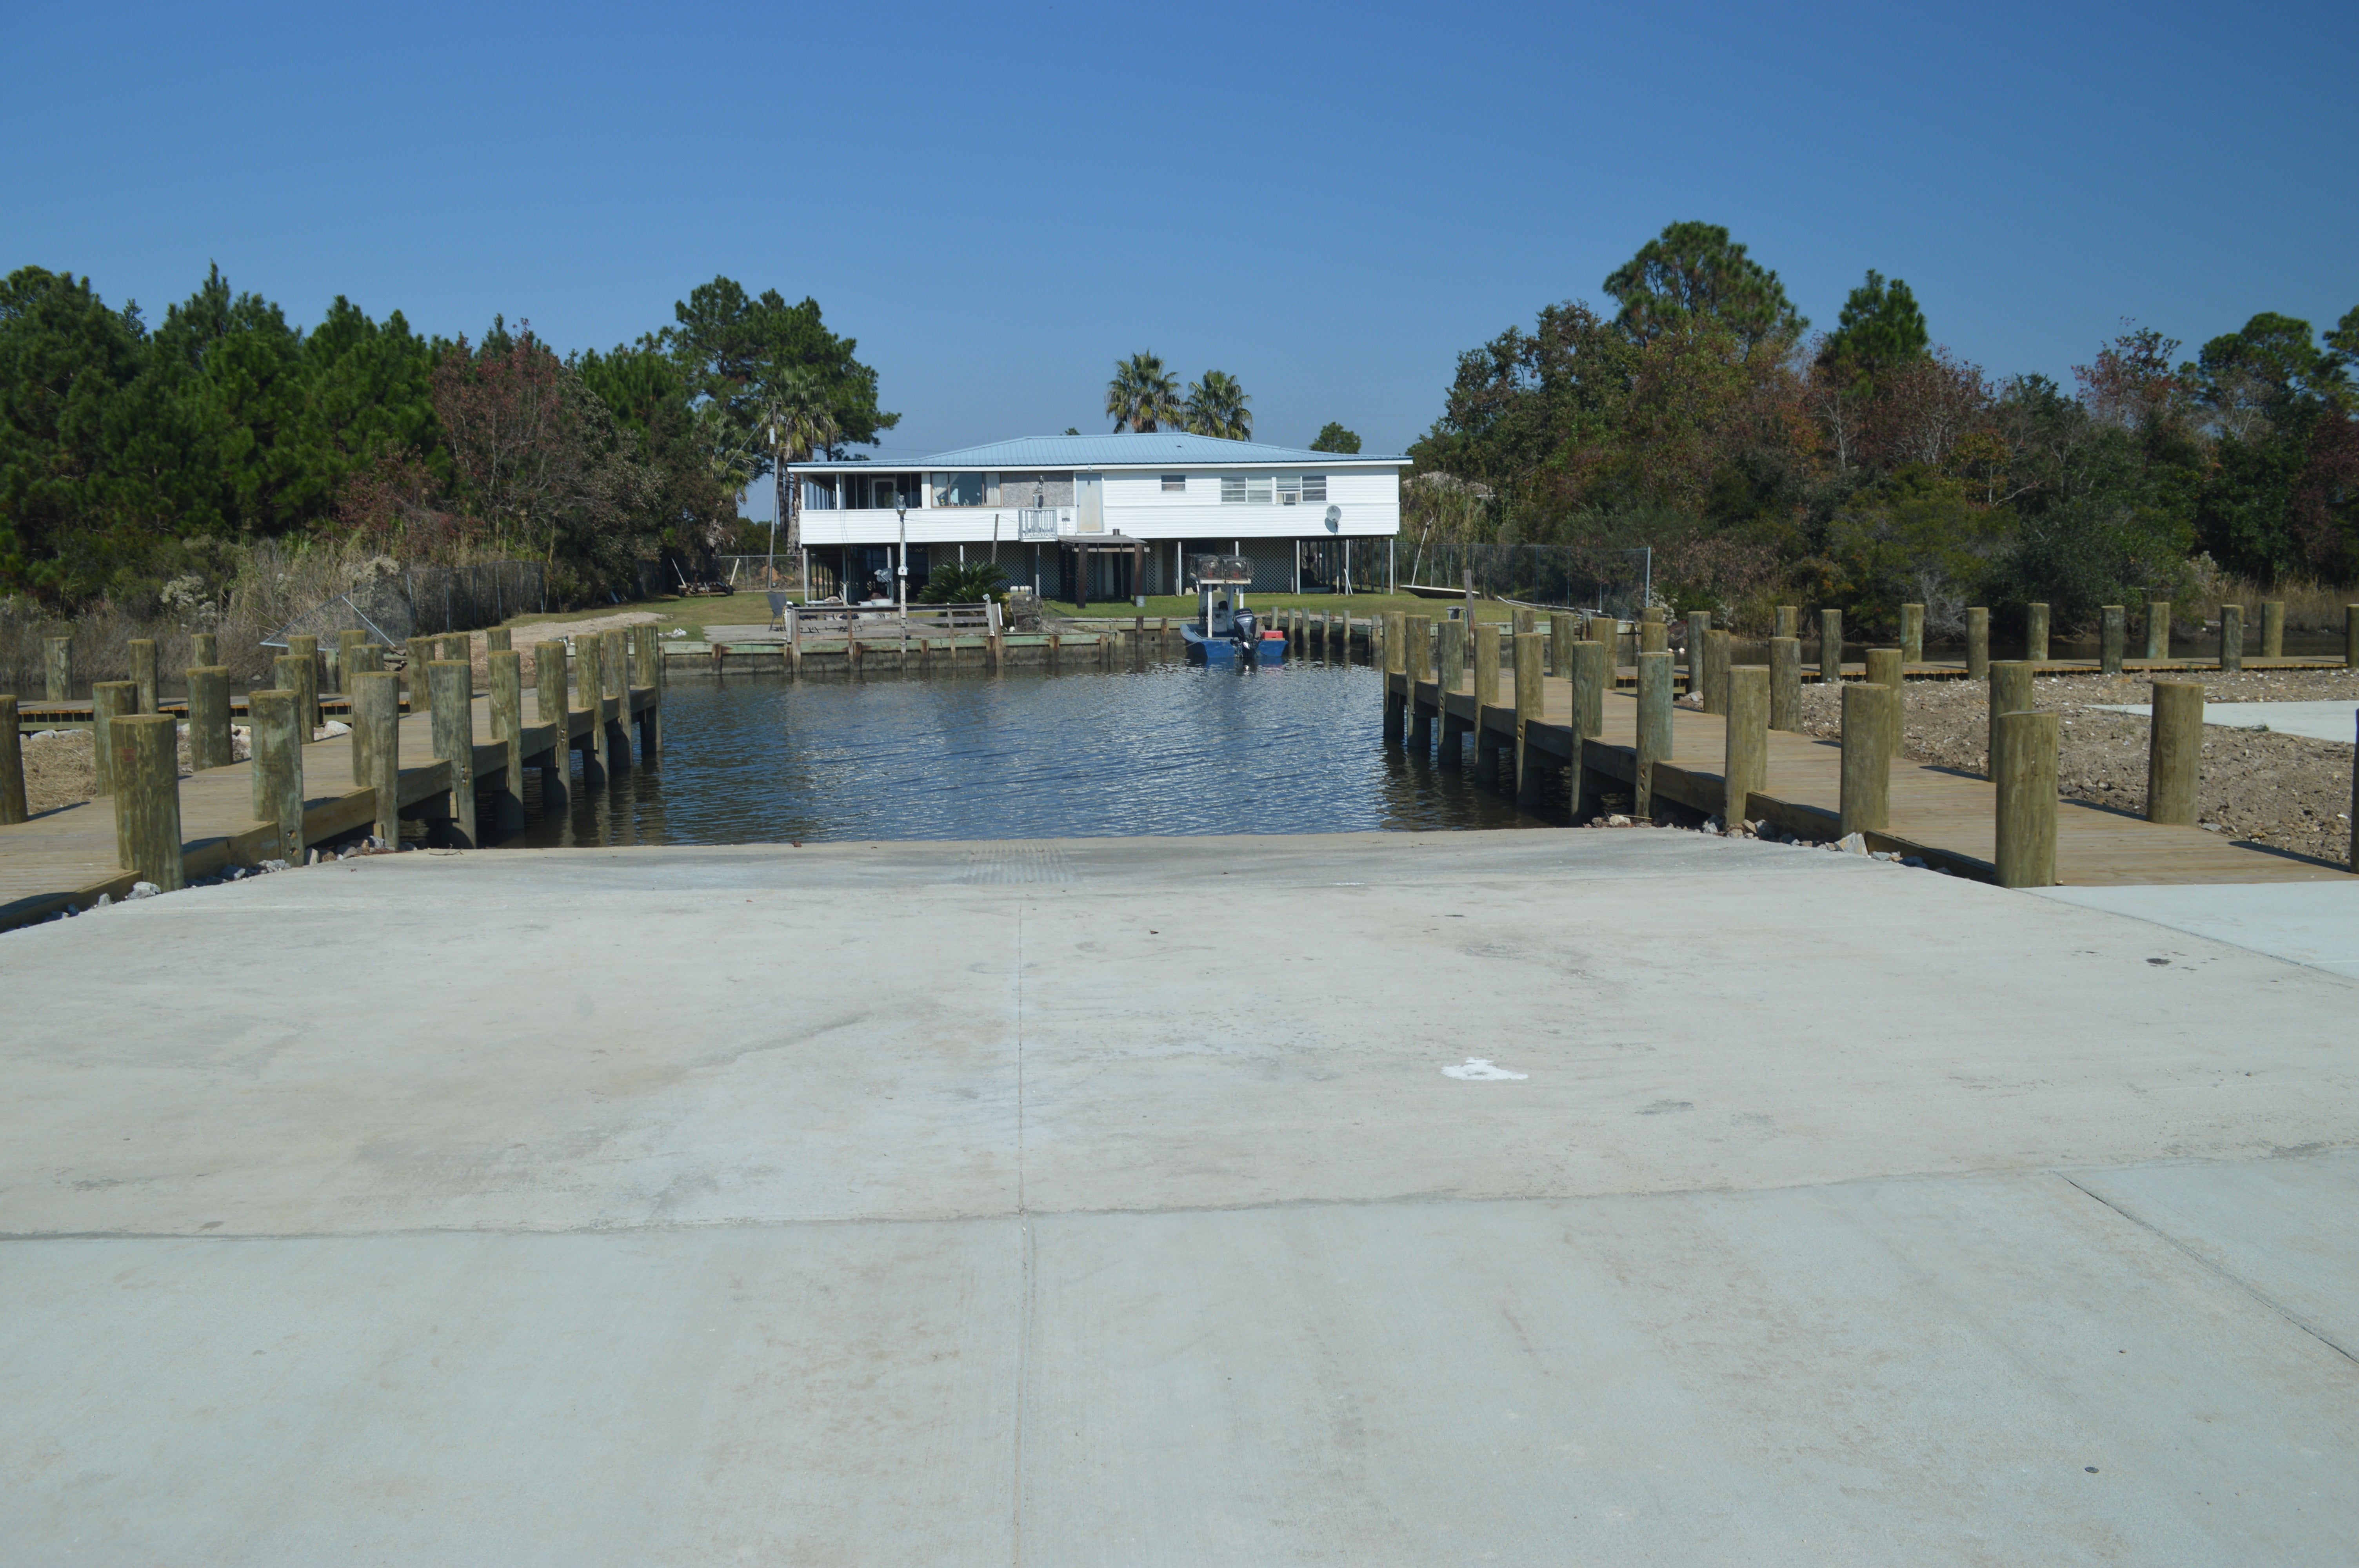 Delta Port Marina located at 5080 Green Dr., in Coden, Alabama